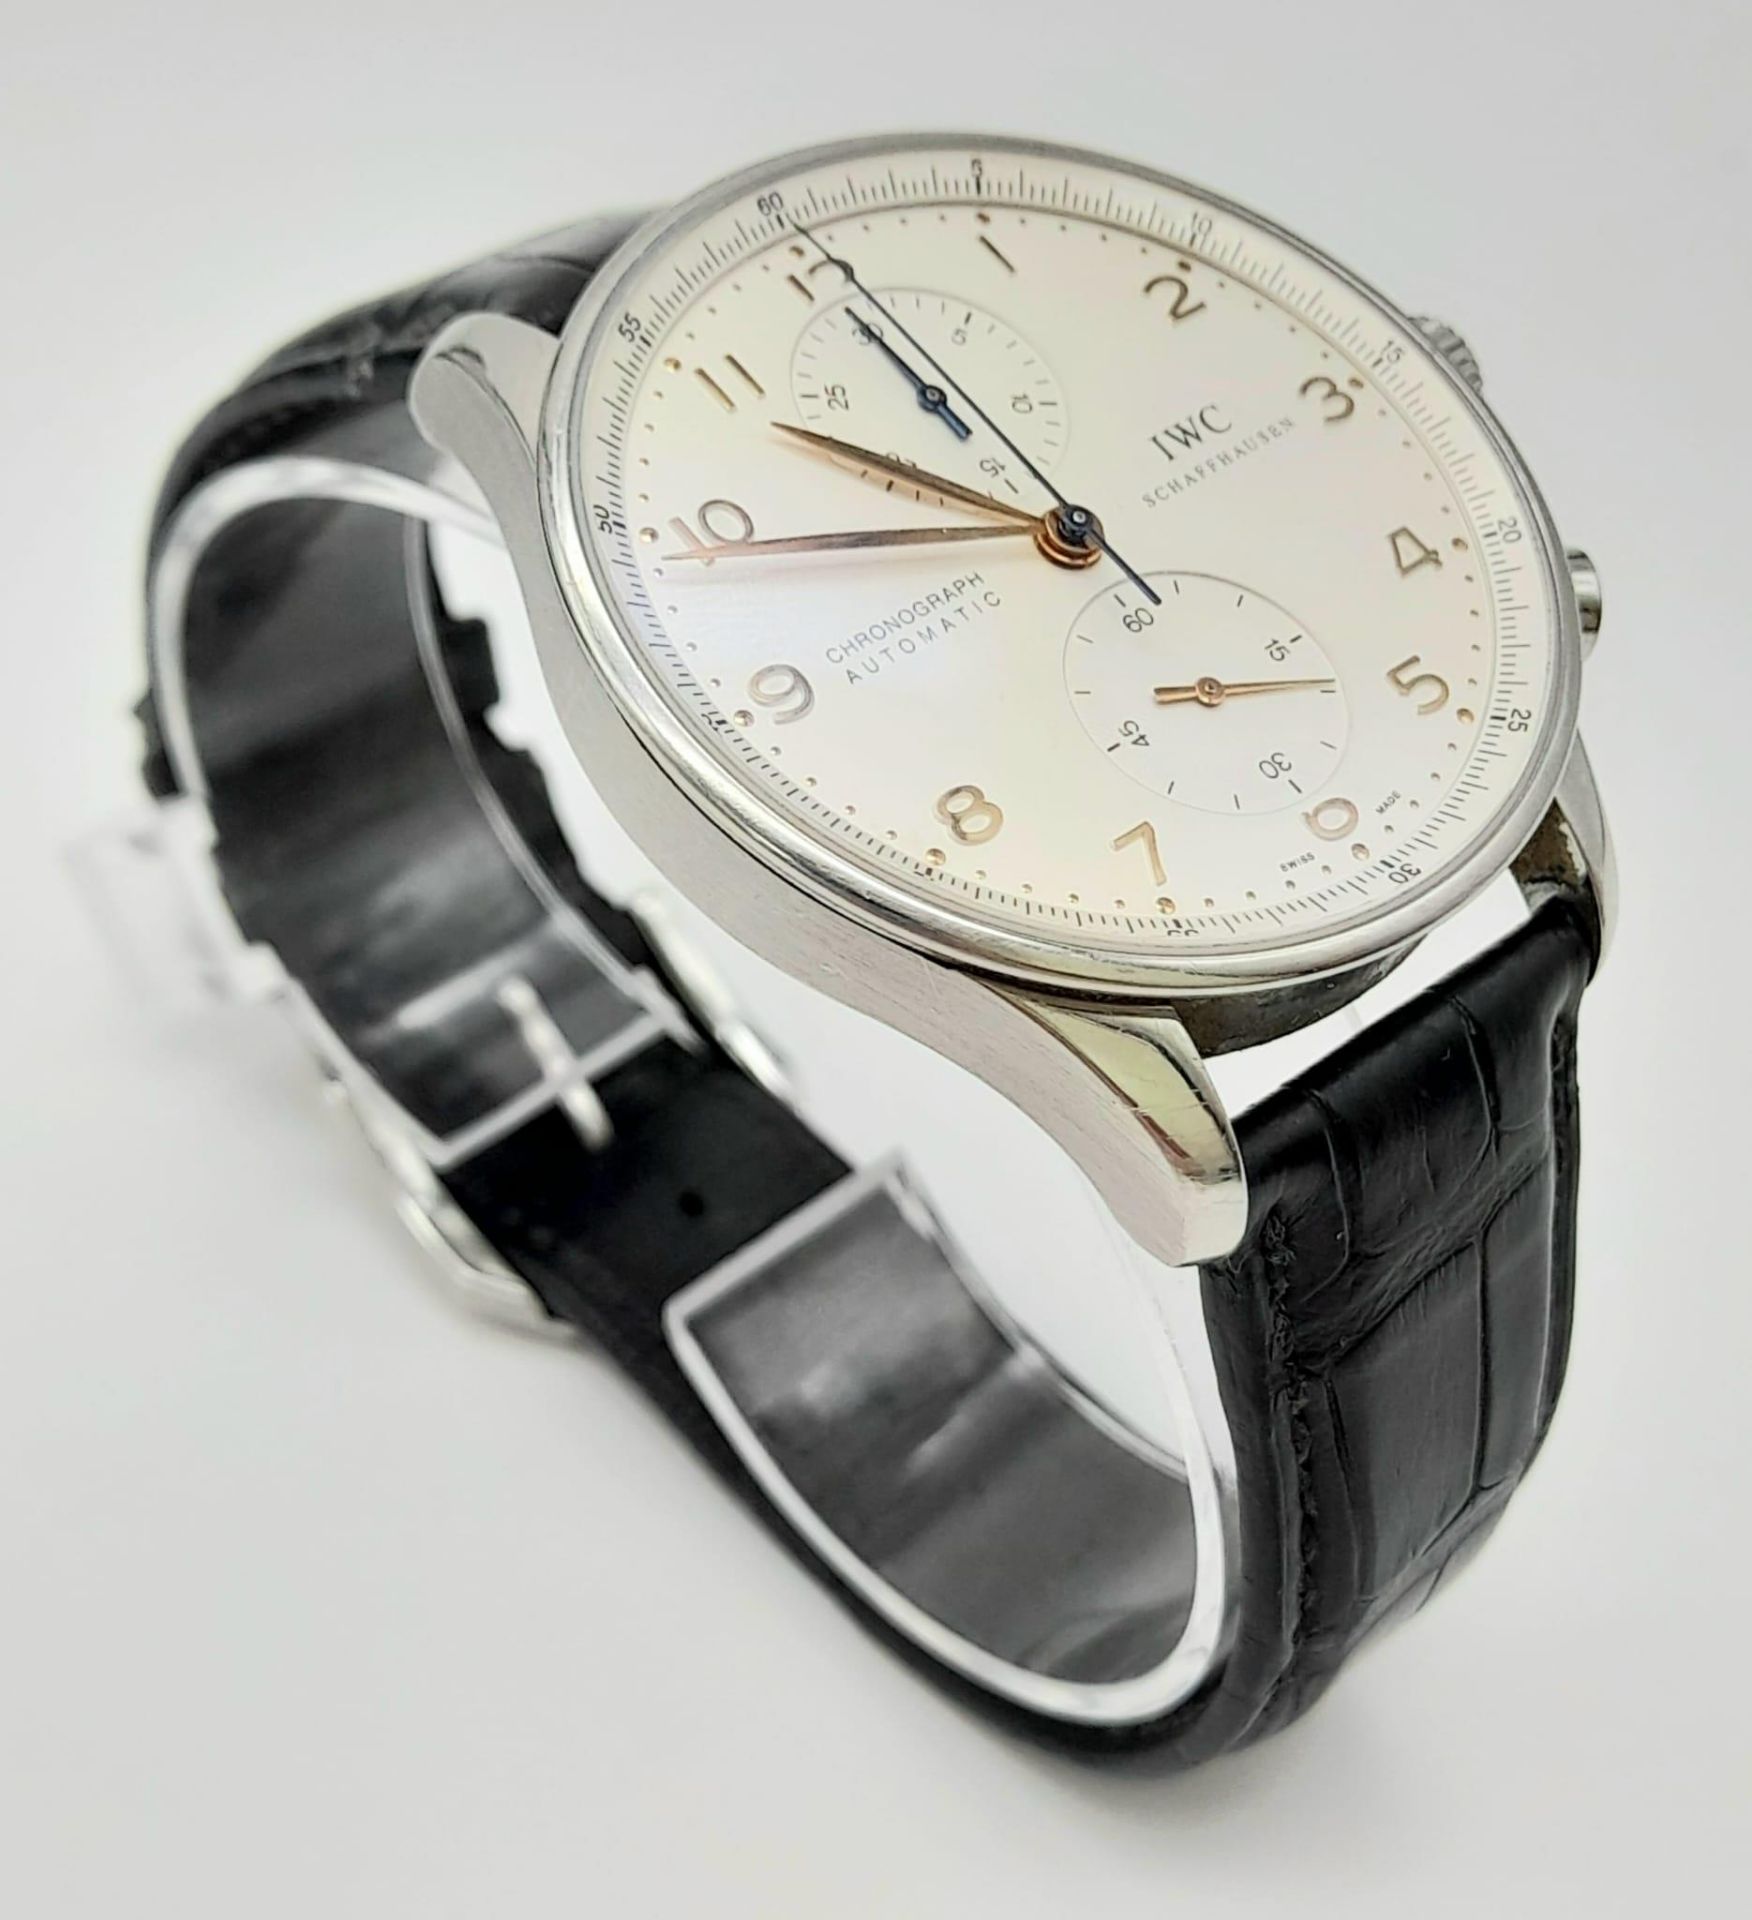 IWC PORTUGUESE CHRONOGRAPH WATCH, BLACK LEATHER STRAP AND CREAM DIAL. MODEL IW371401 WITH ORIGINAL - Bild 3 aus 10